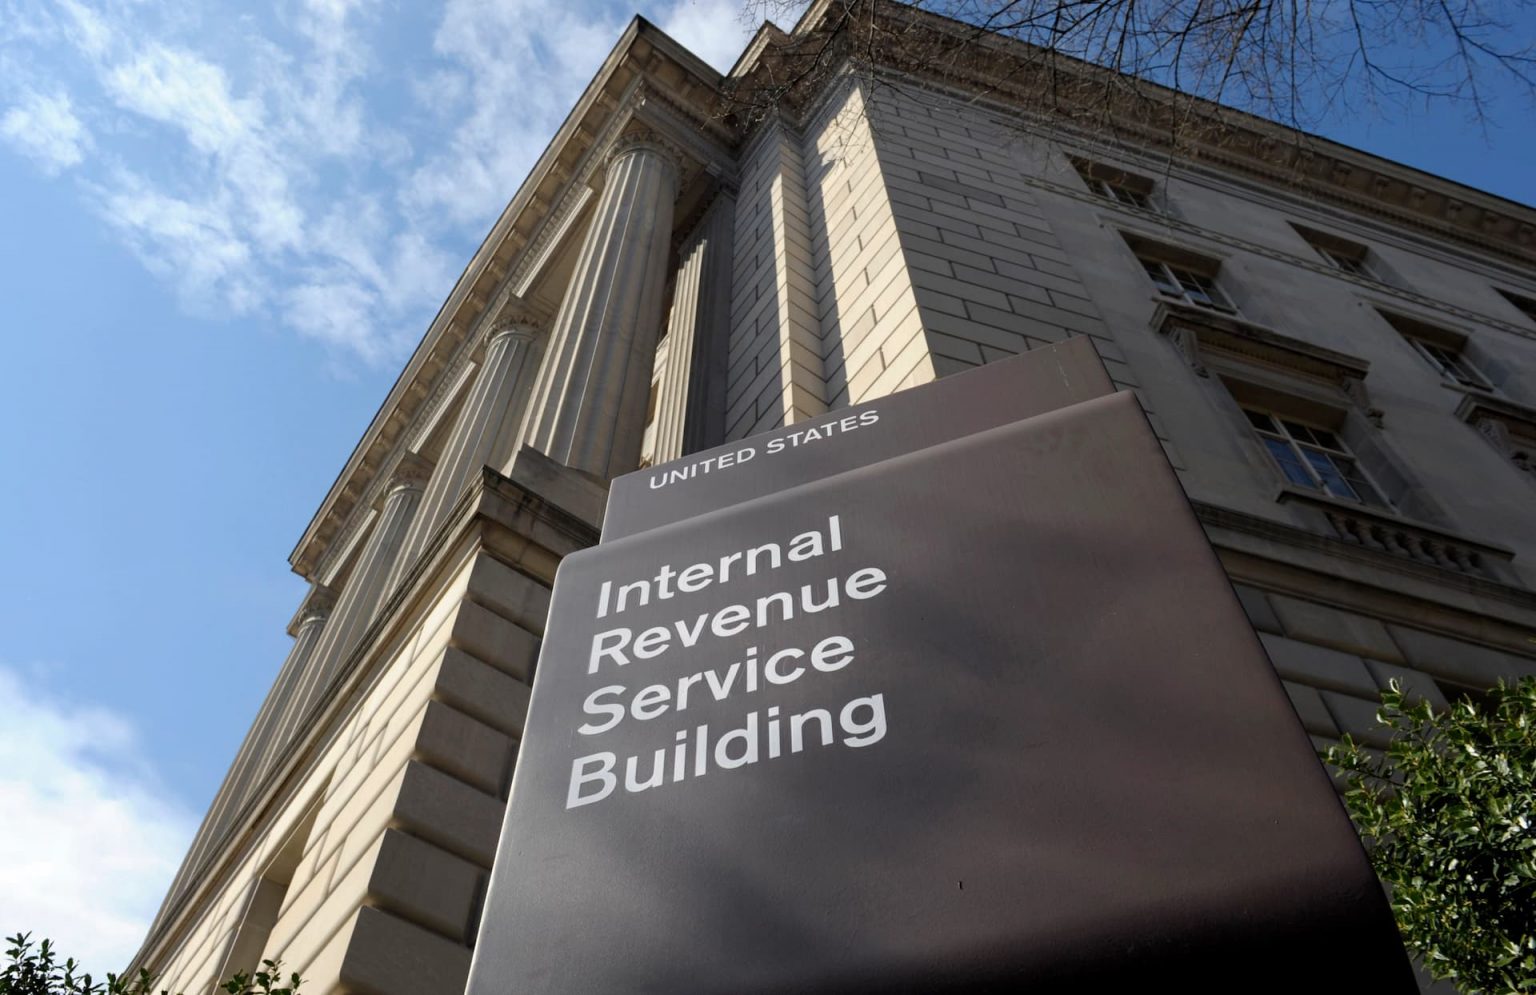 The 2022 IRS Nationwide Tax Forum